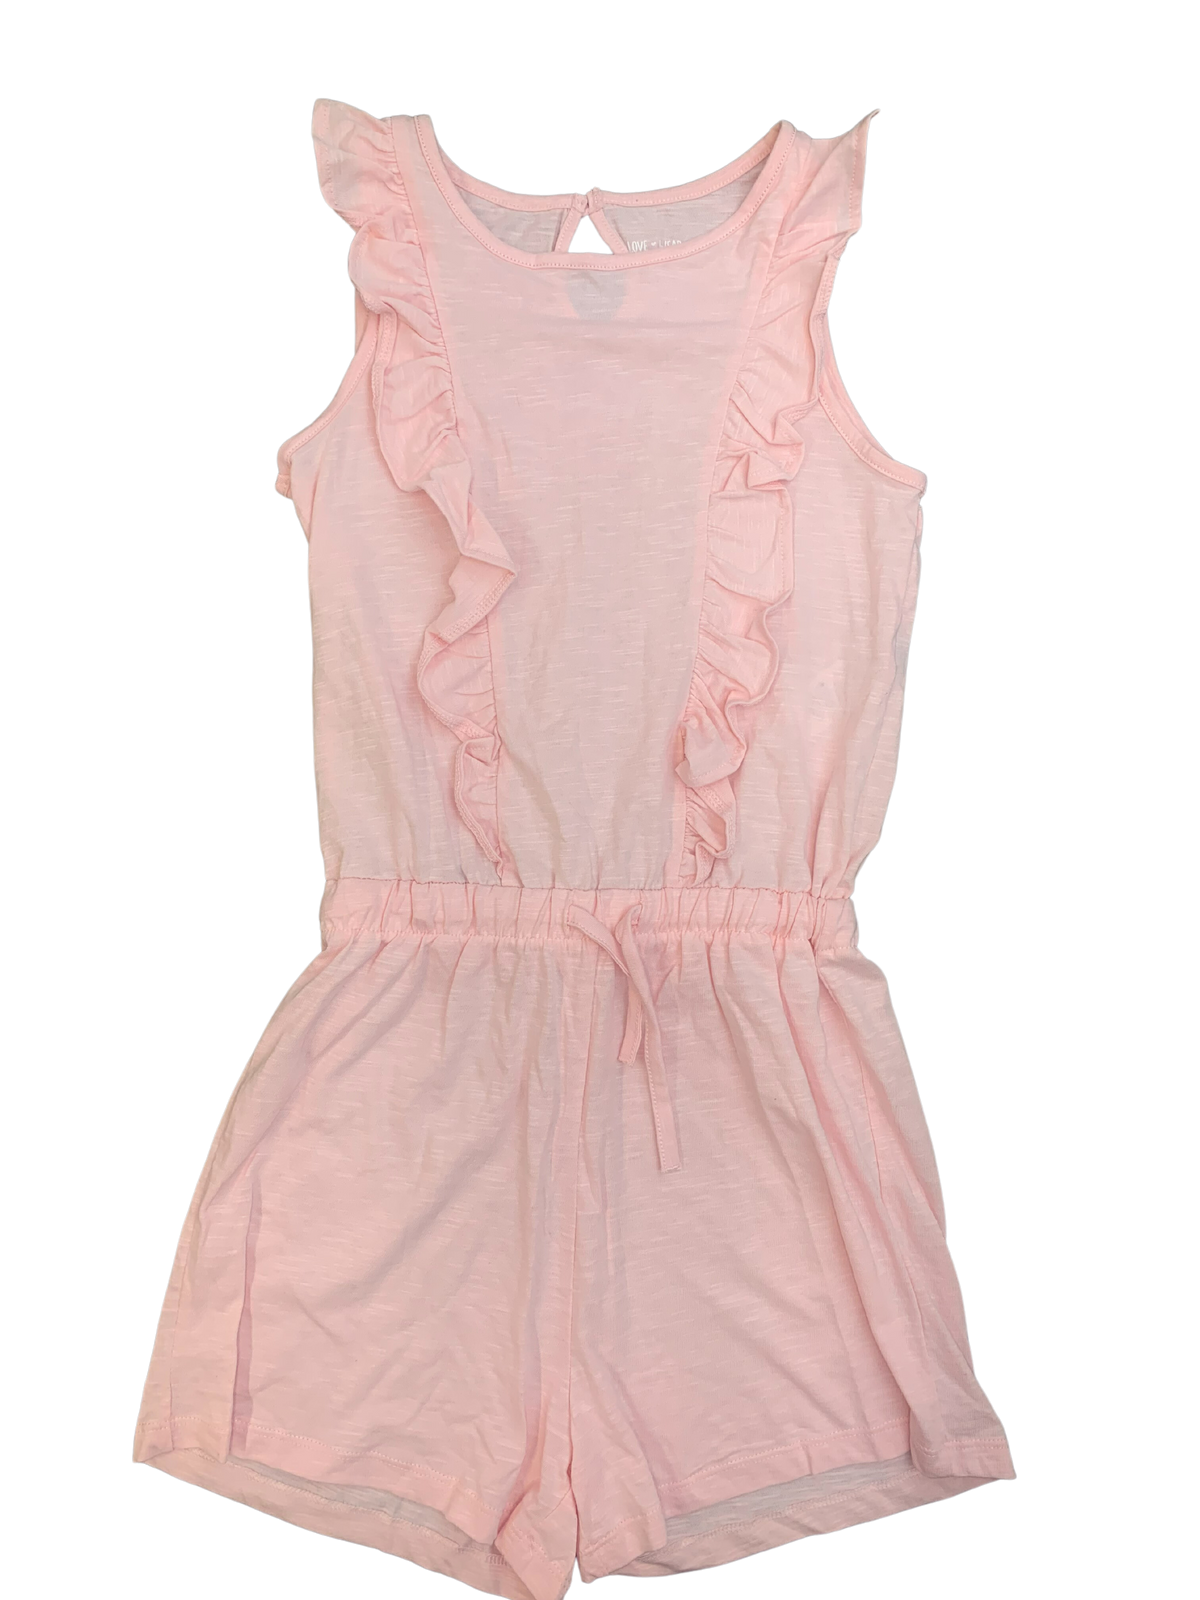 F&F Ruffled Cotton Playsuit 11-12 Years